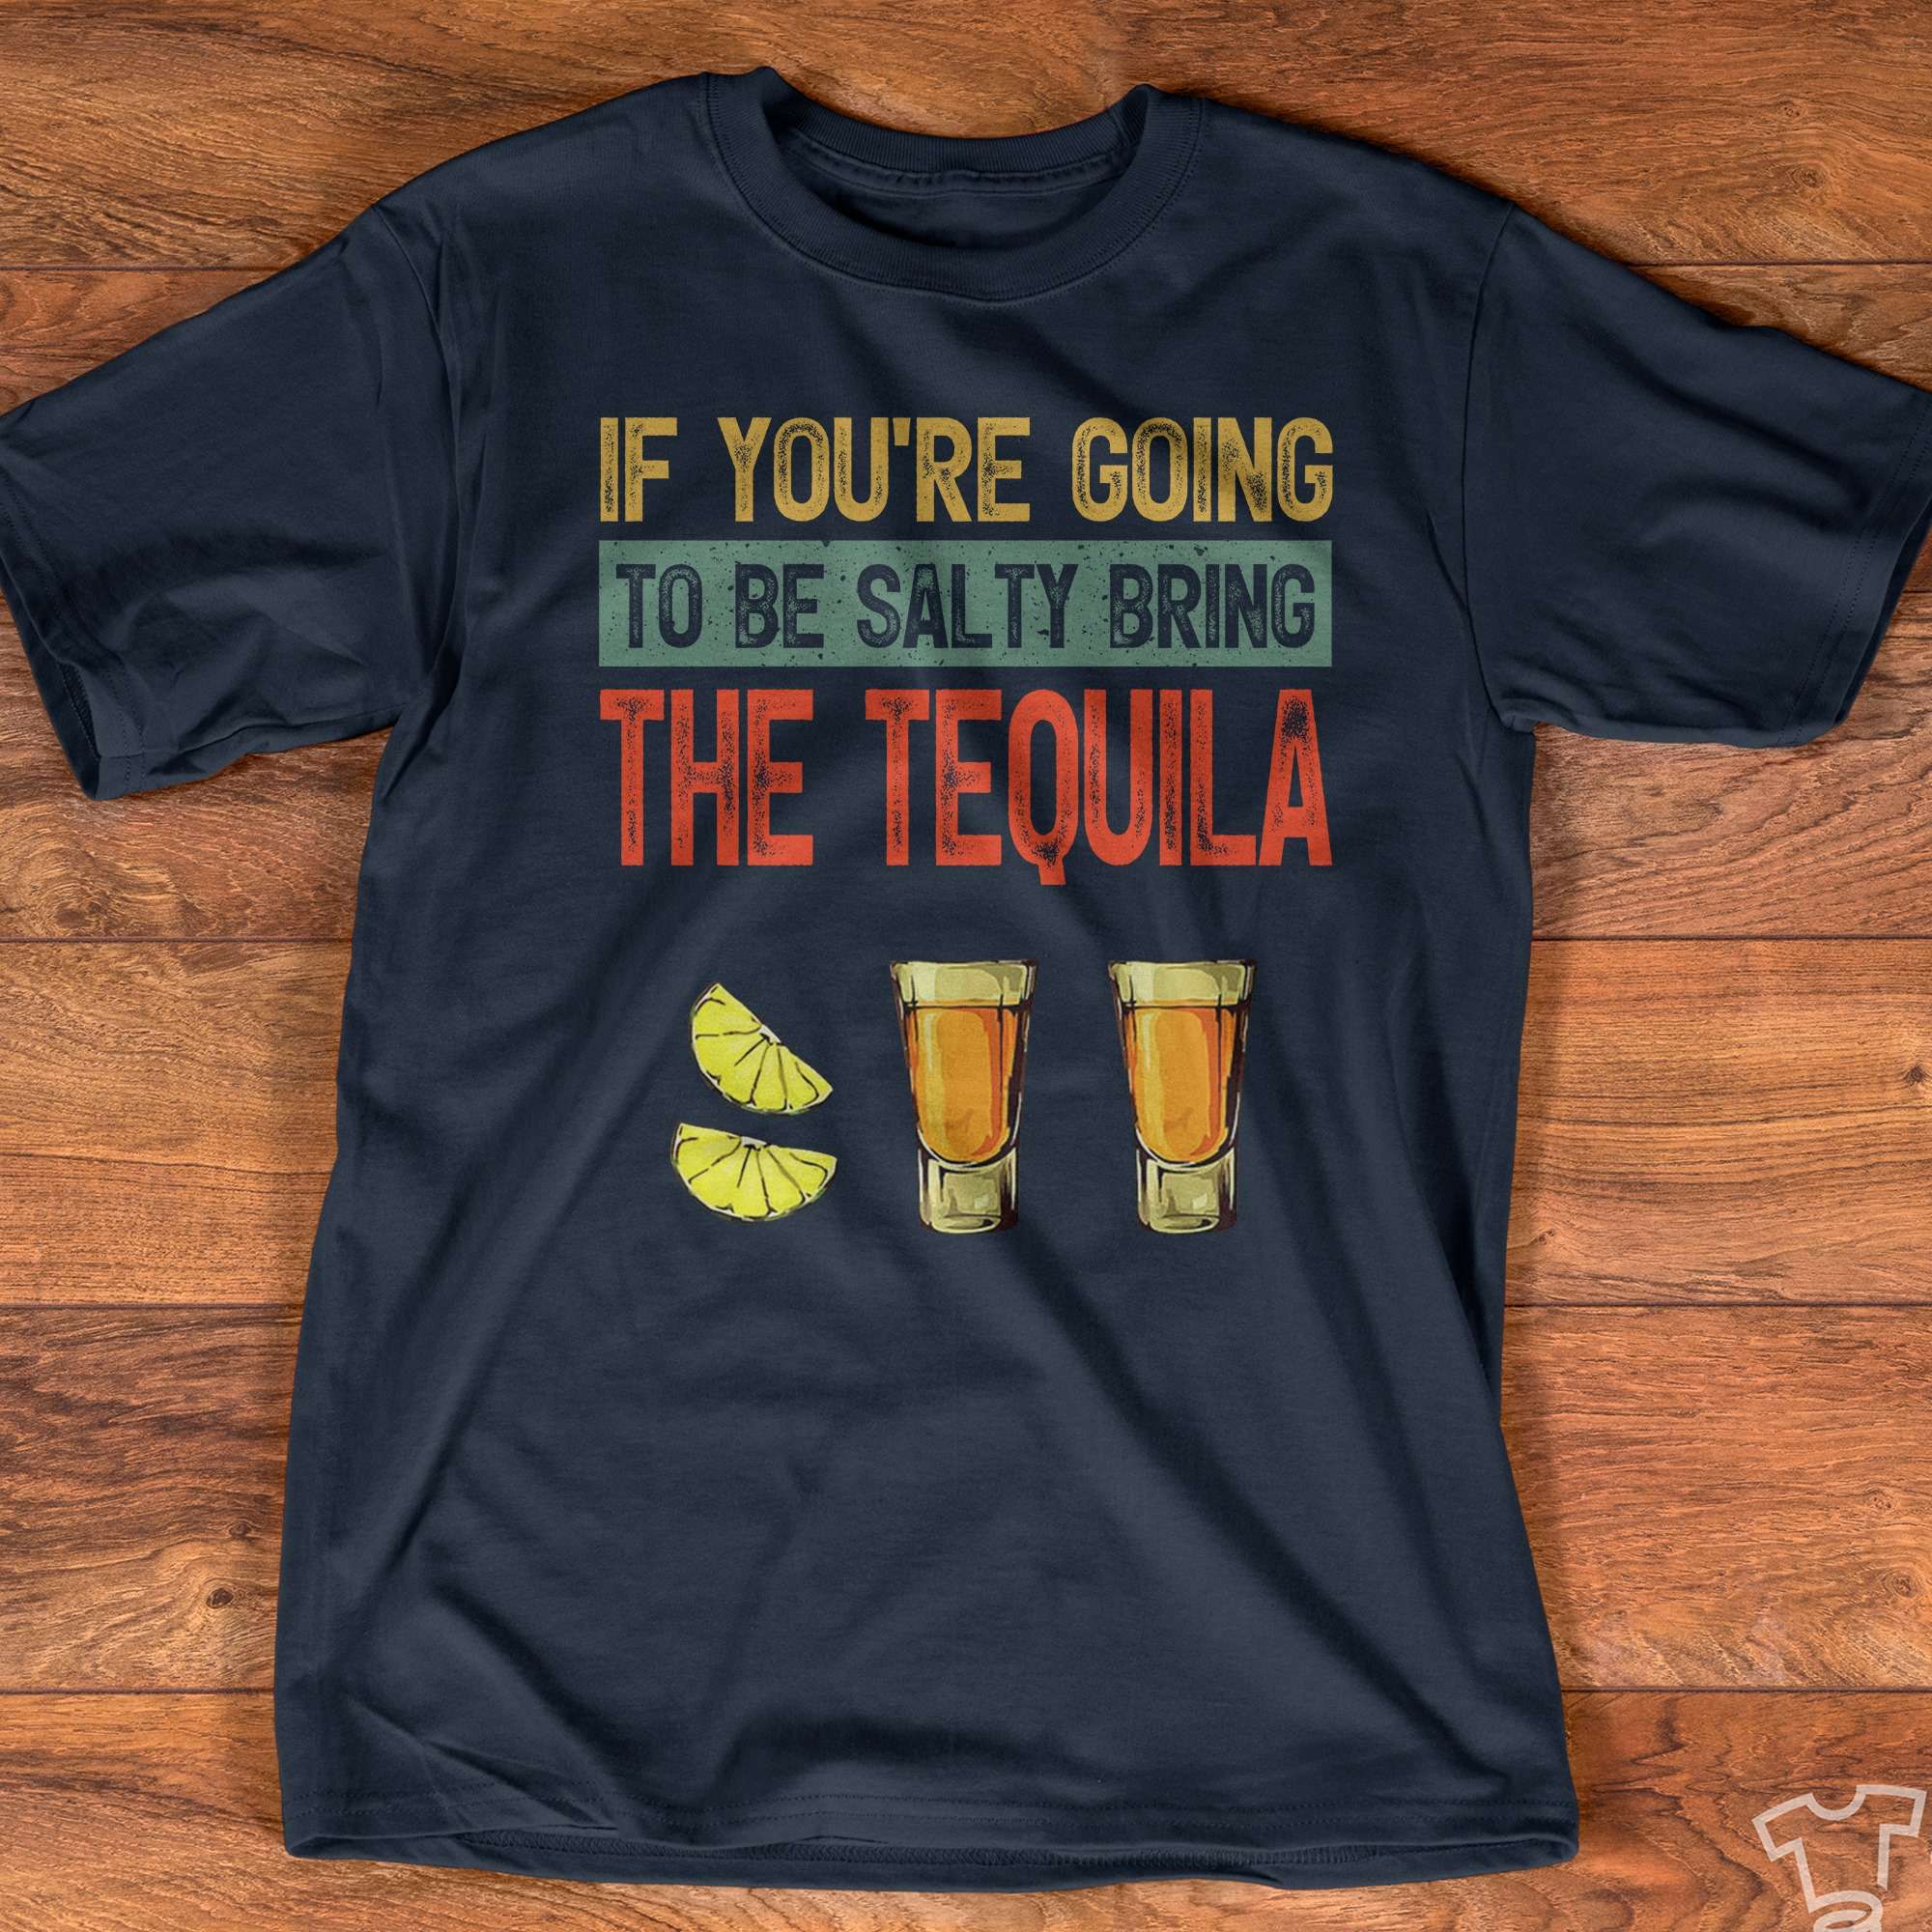 Tequila Wine, Shot Of Tequila - If you're going to be salty bring the tequila